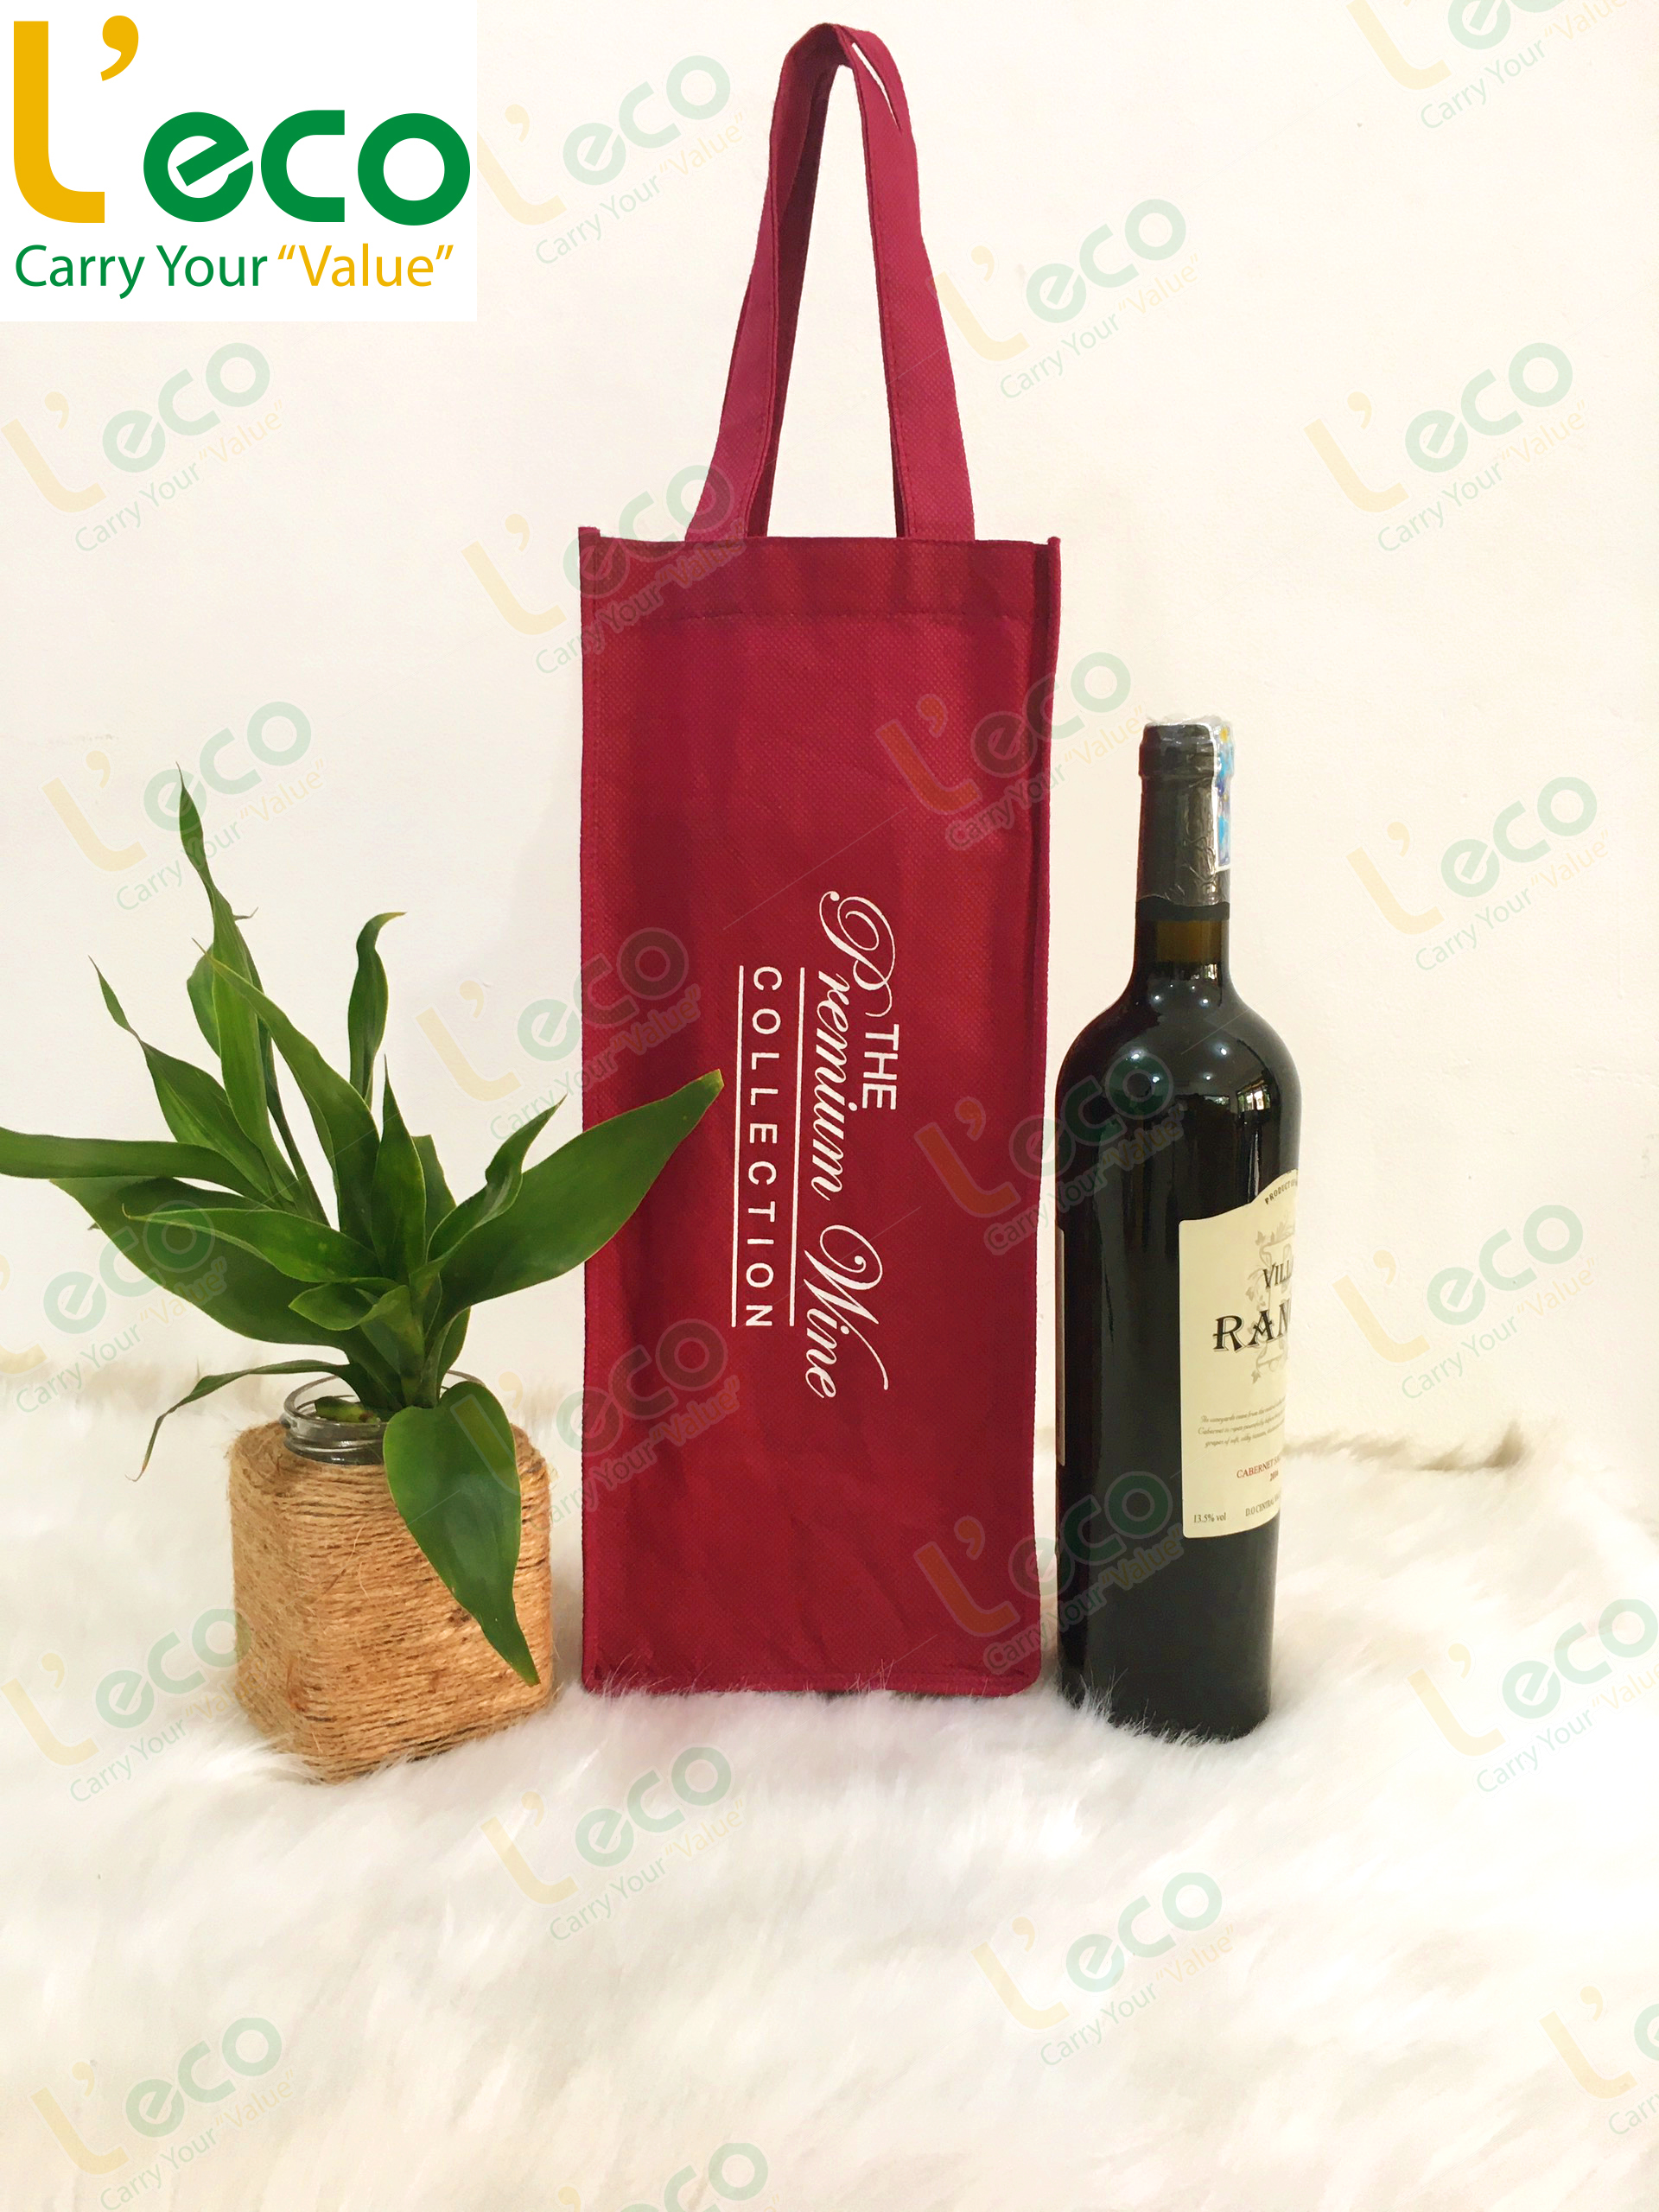 Non-woven wine bags increase product value